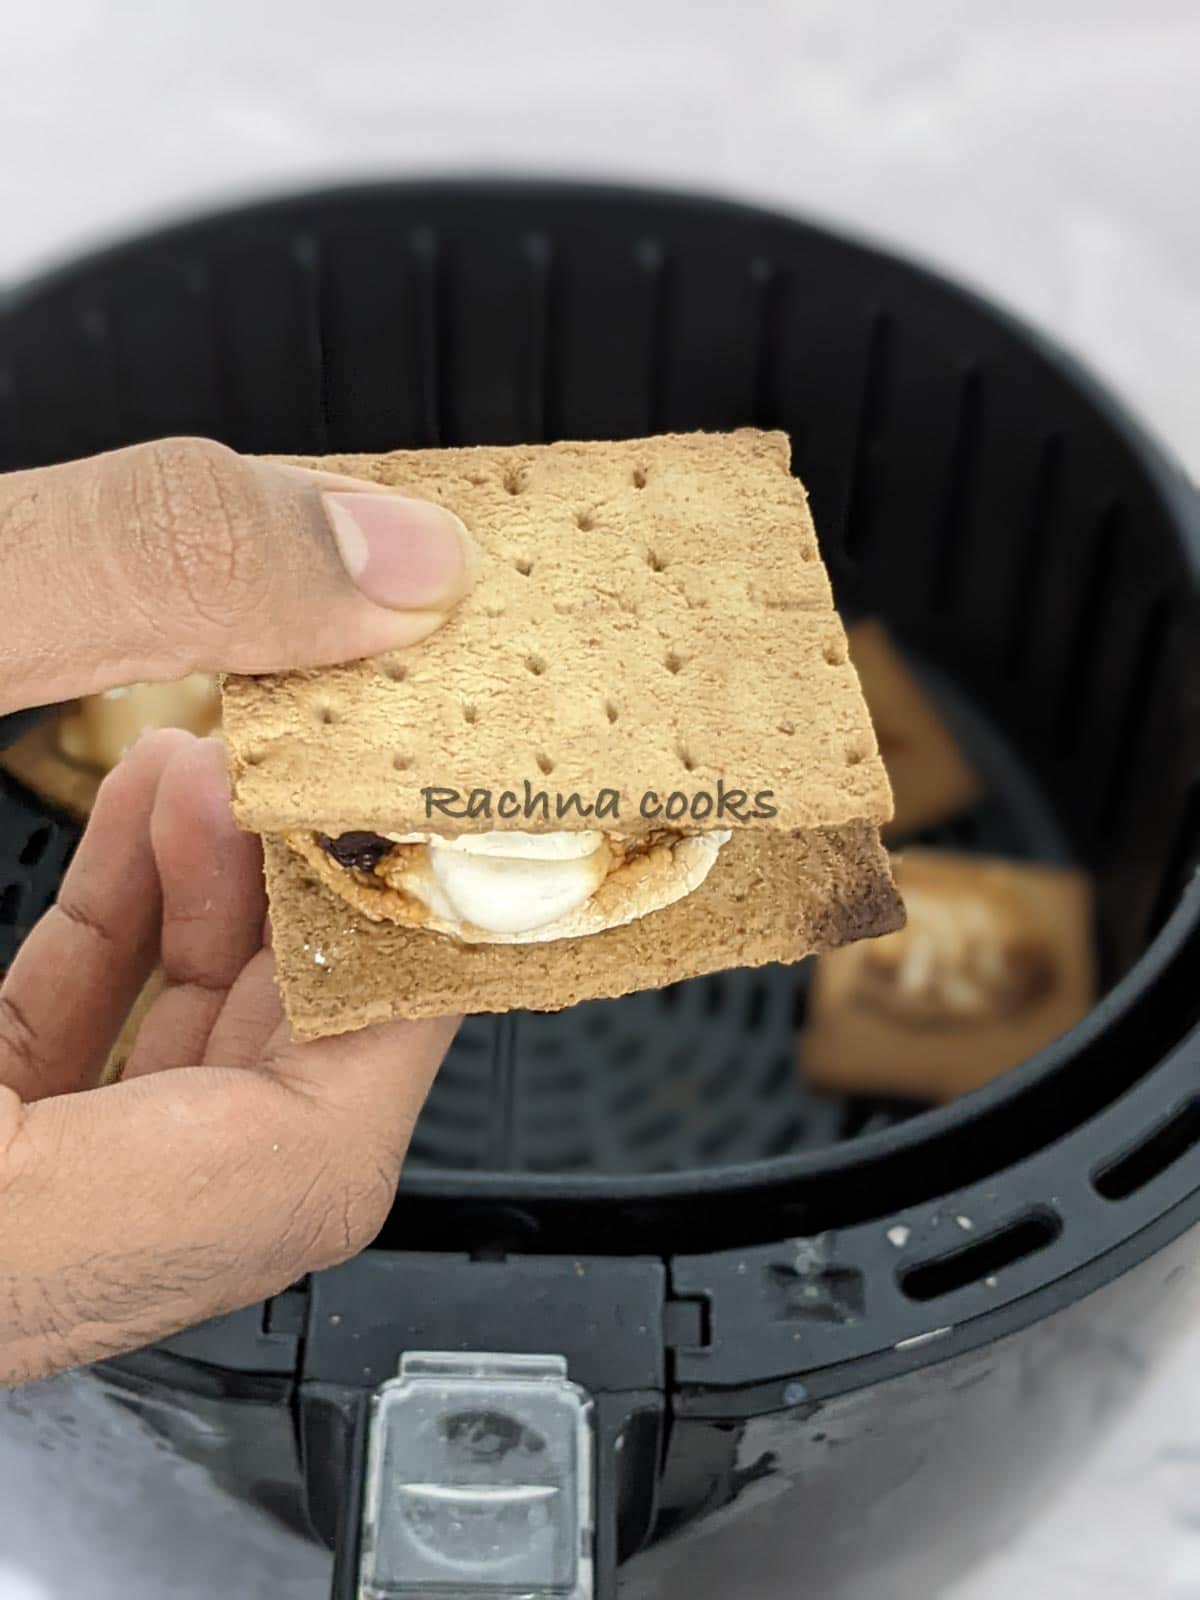 One s'more held in hand with the background of air fryer basket.